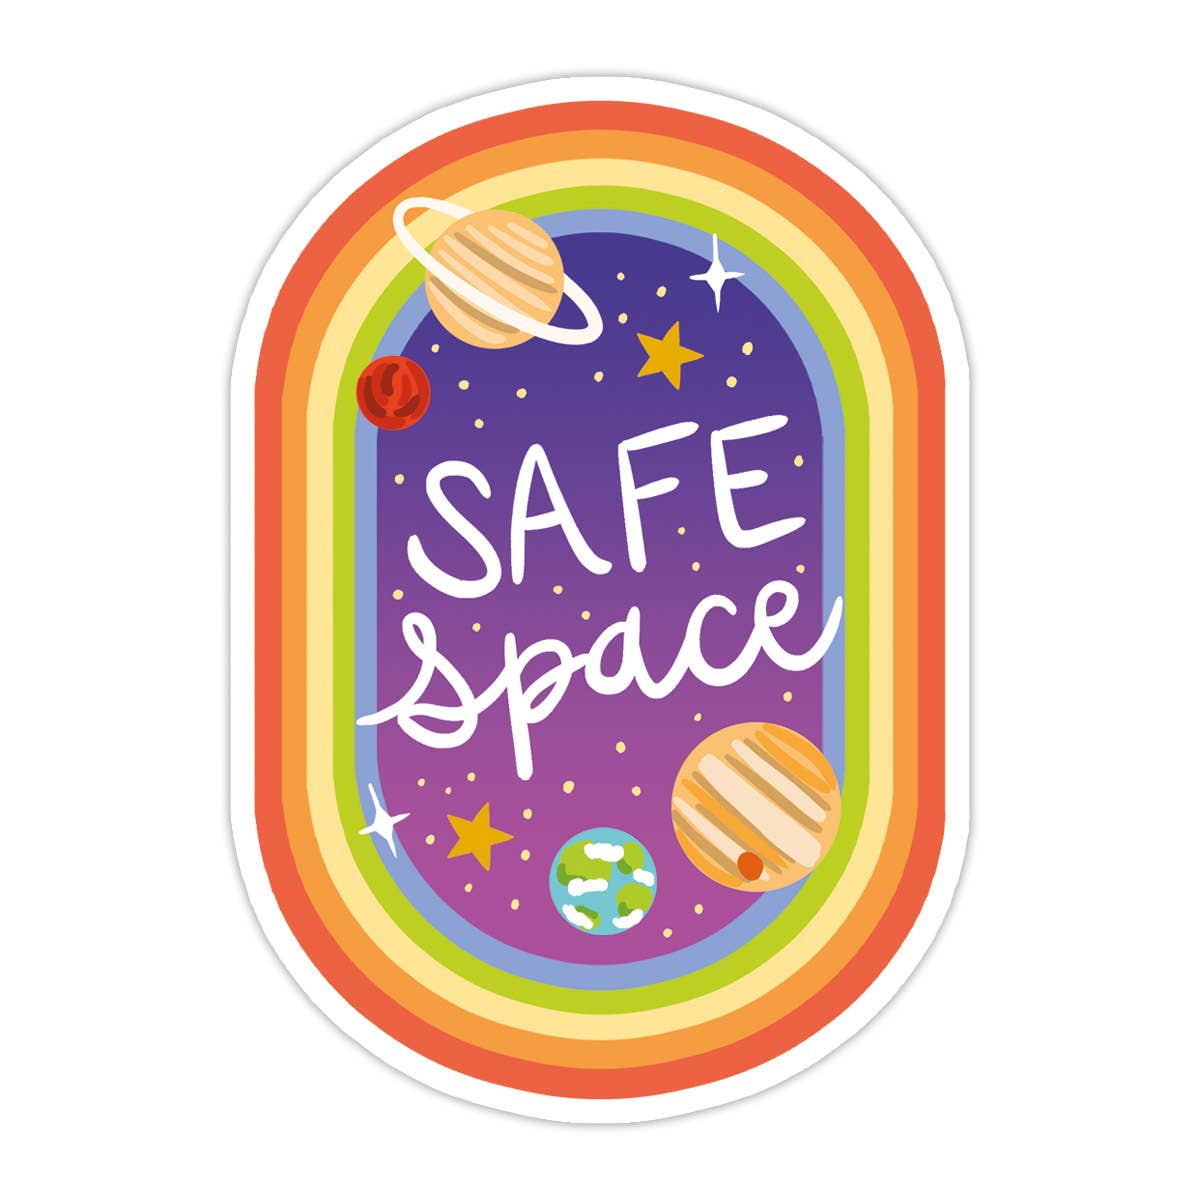 Image of oval sticker with rainbow edging and blue background like night sky with planets, stars and white text says, "Safe space". 